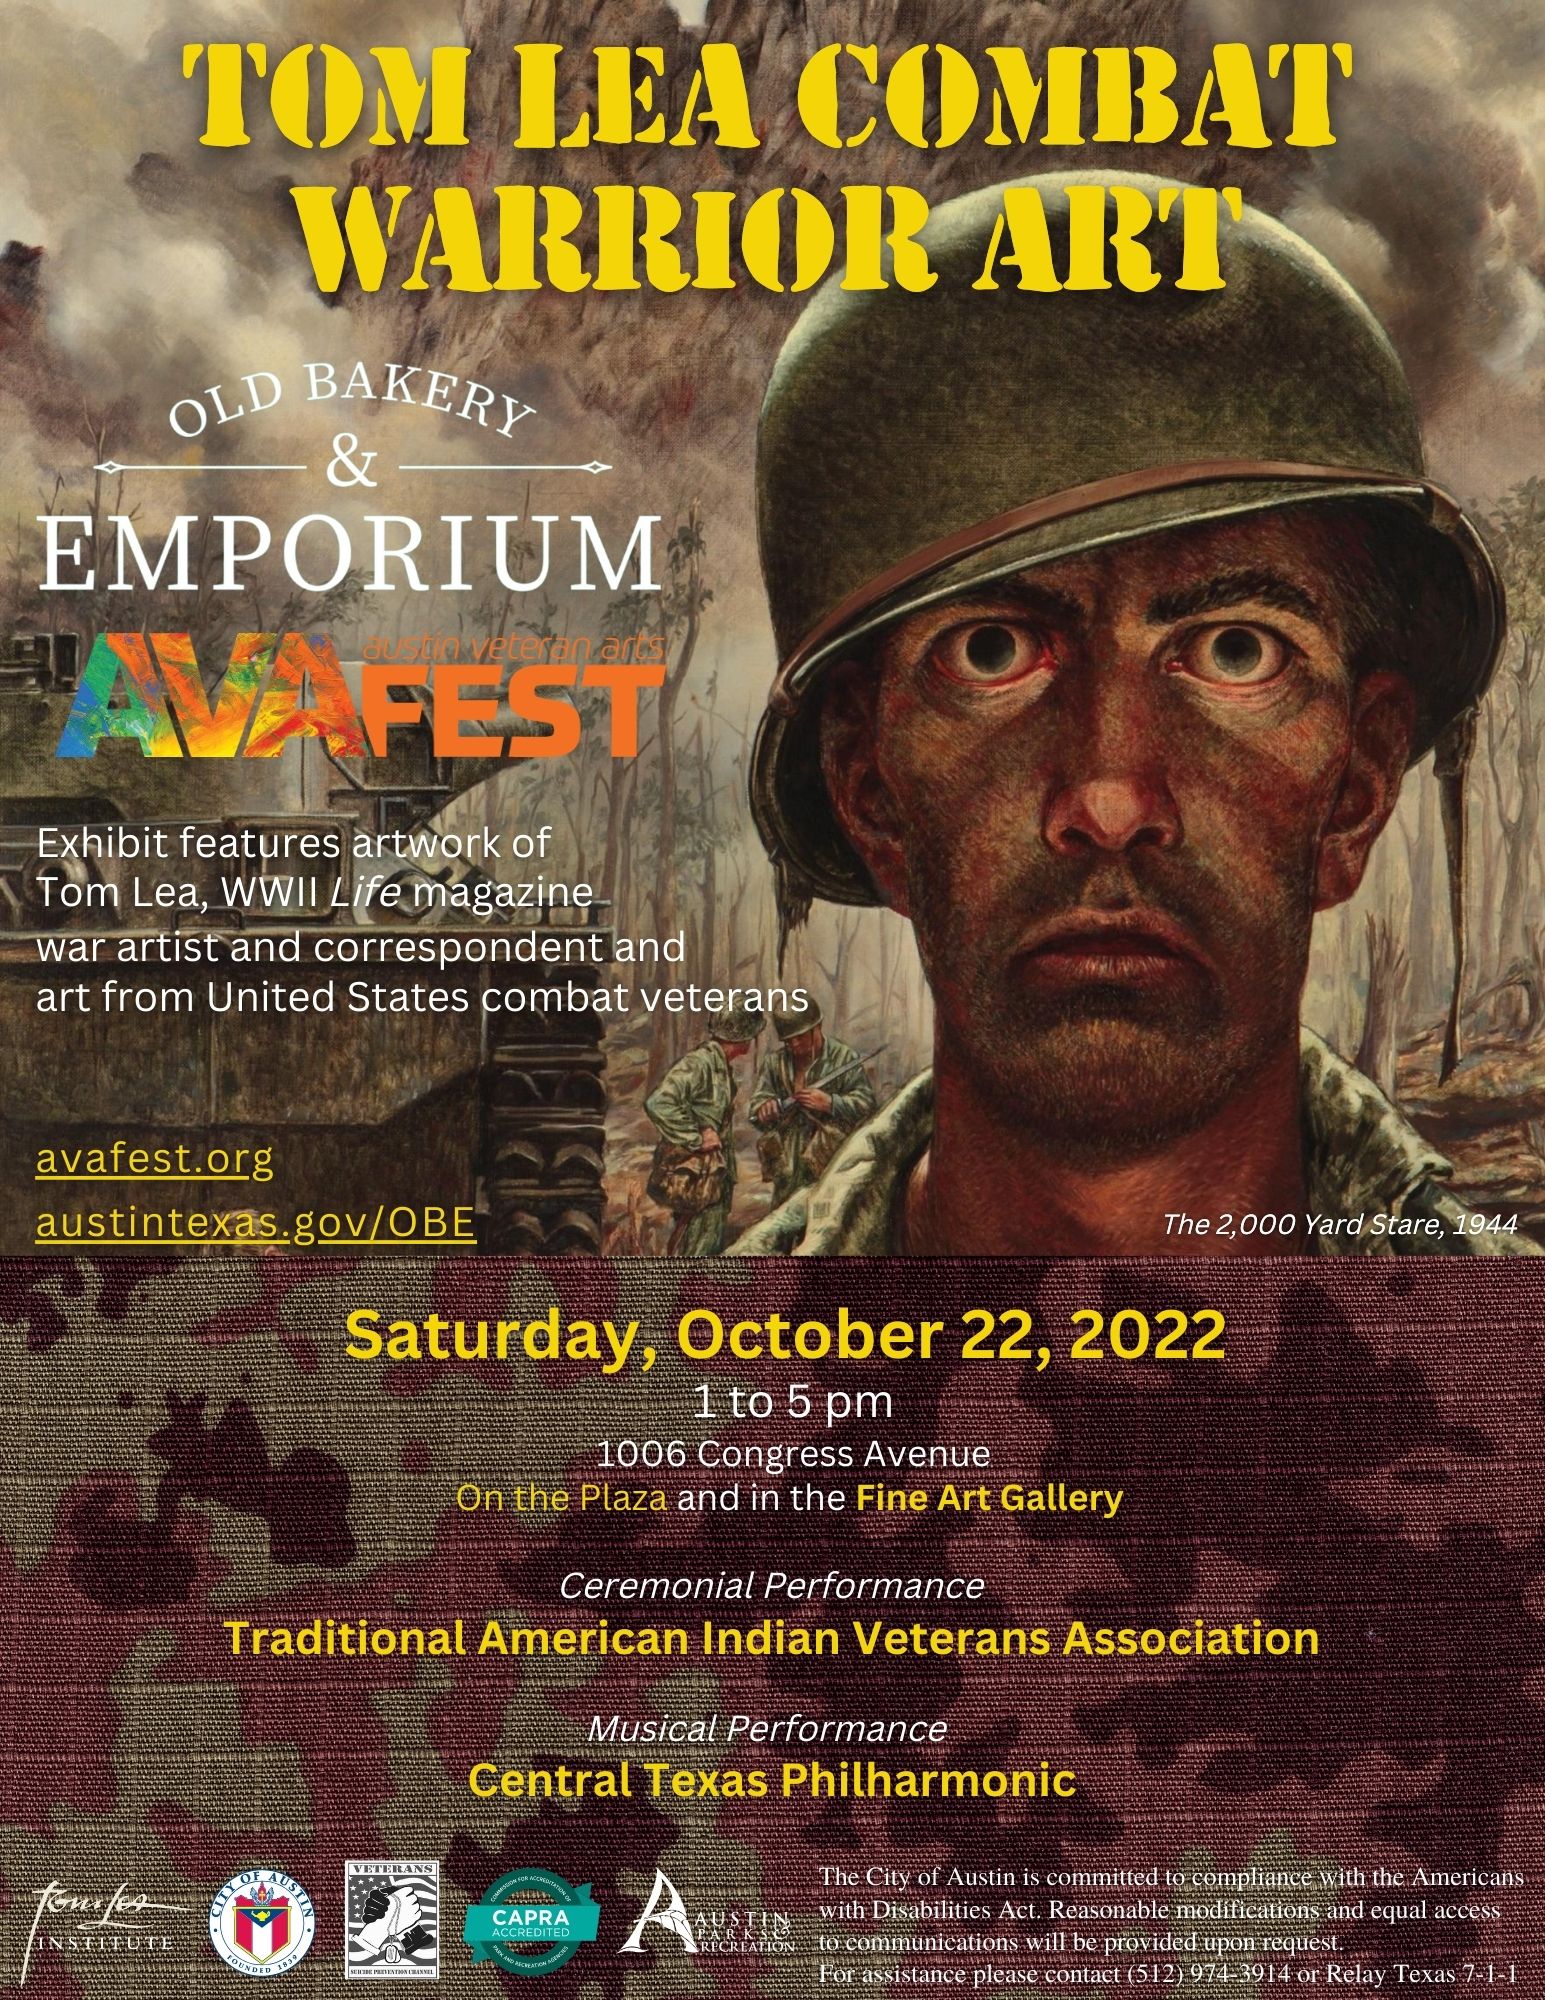 Tom Lea Combat Warrior Art Exhibit Poster - Takes Place on Saturday, October 22 from 1:00 to 5:00pm at The Old Bakery and Emporium on 1006 Congress Avenue